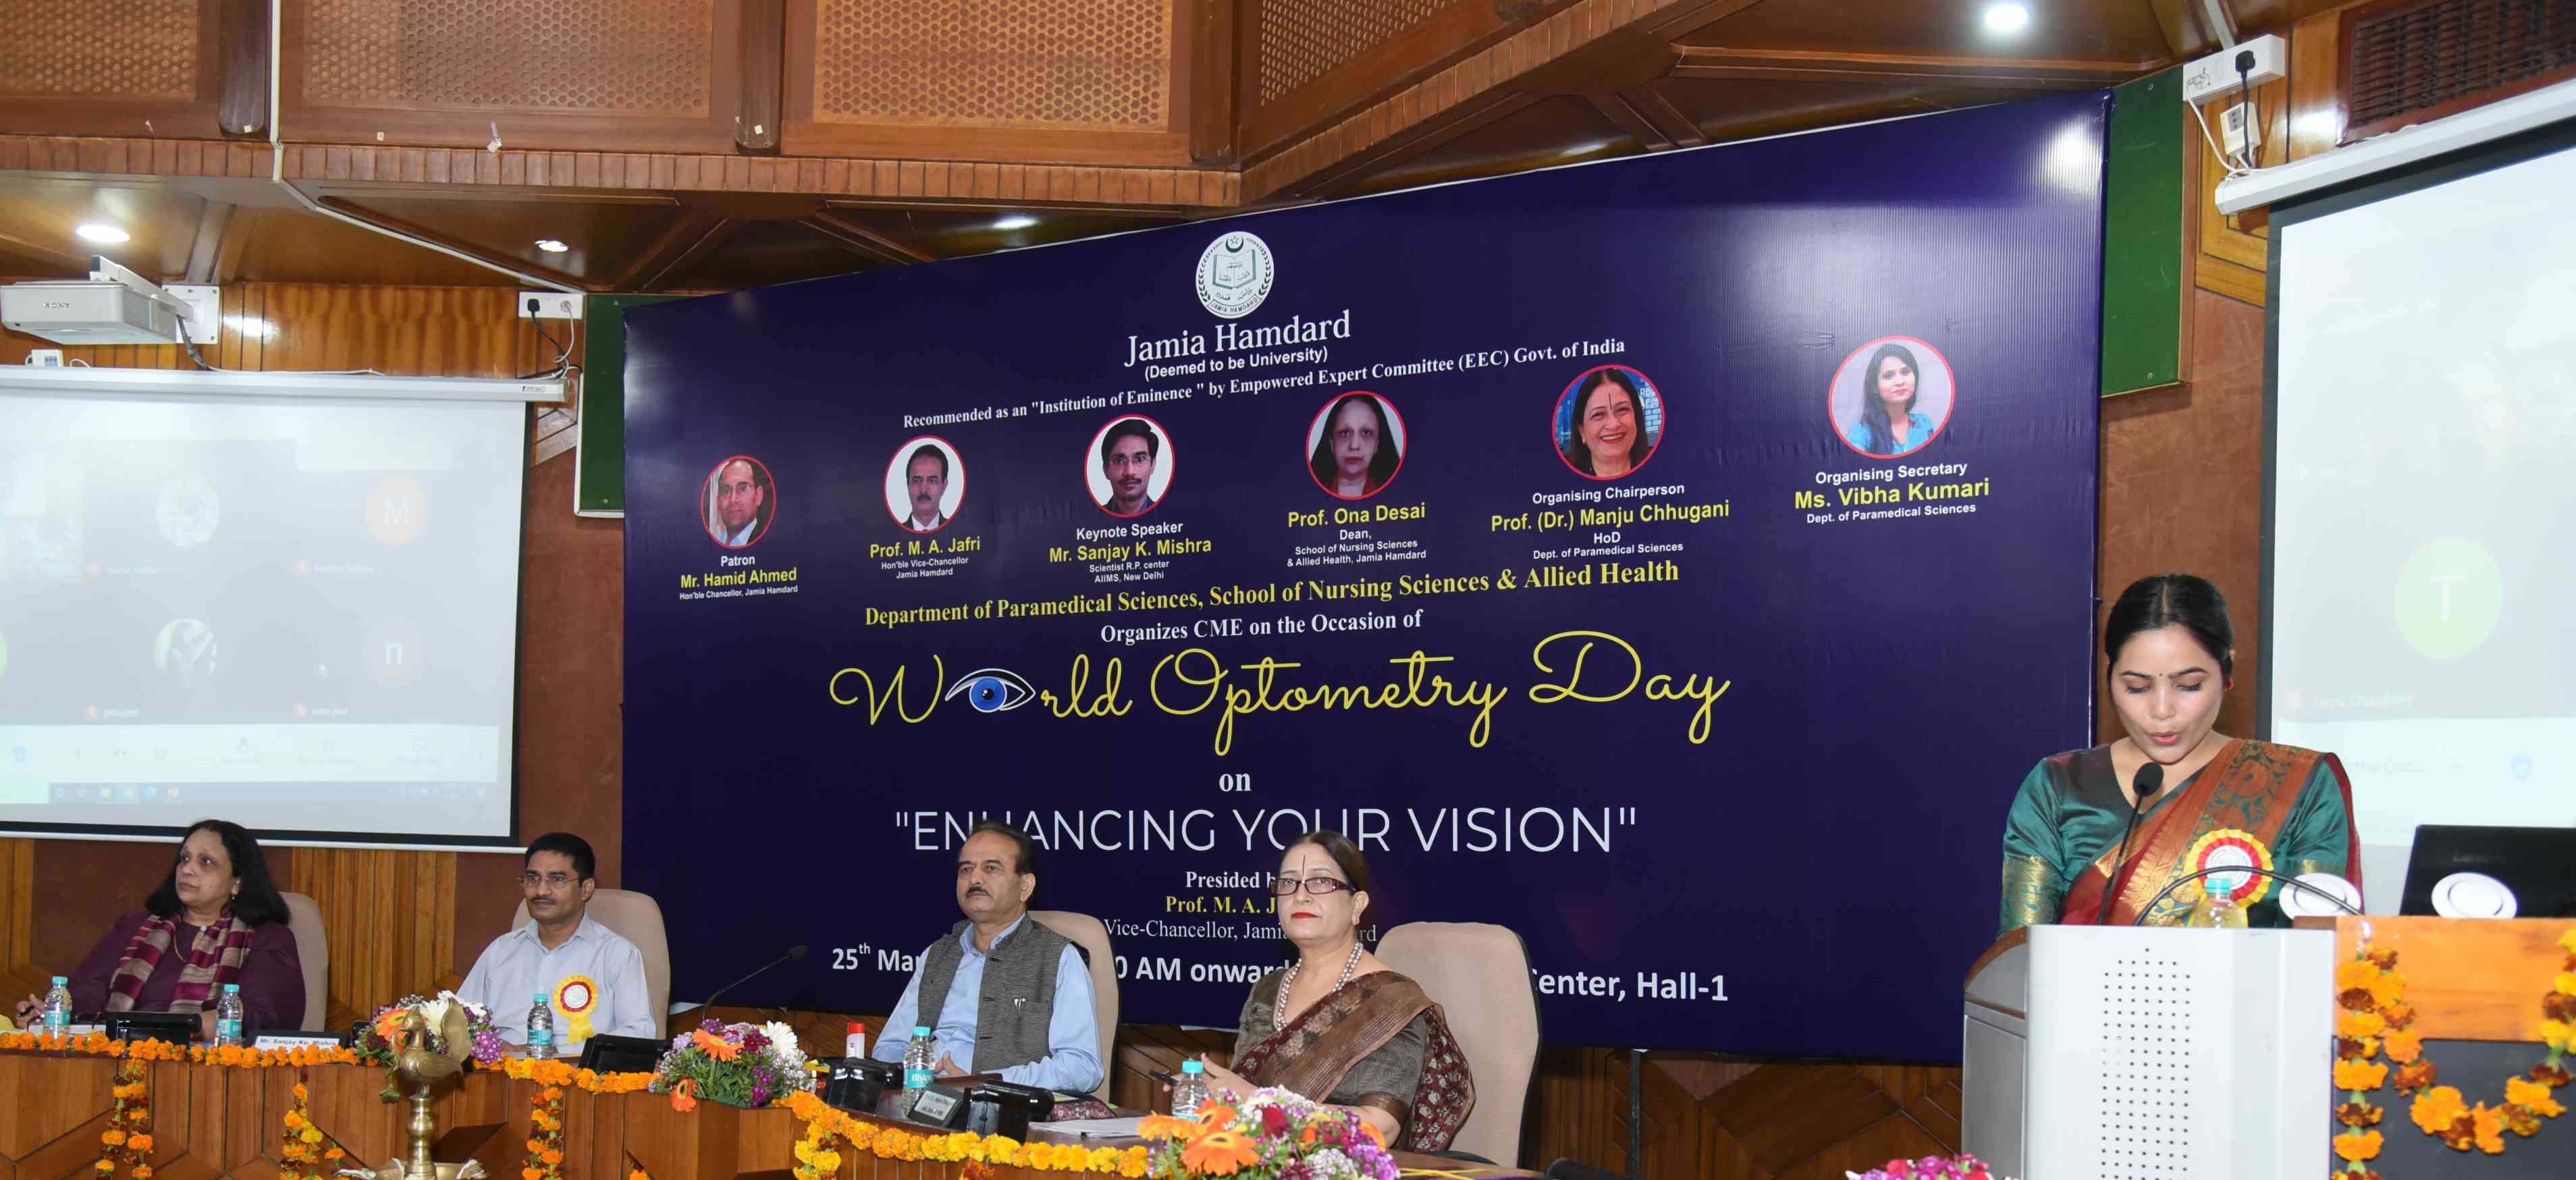 jamia-hamdard-celebrates-world-optometry-day-with-theme-enhancing-your-vision